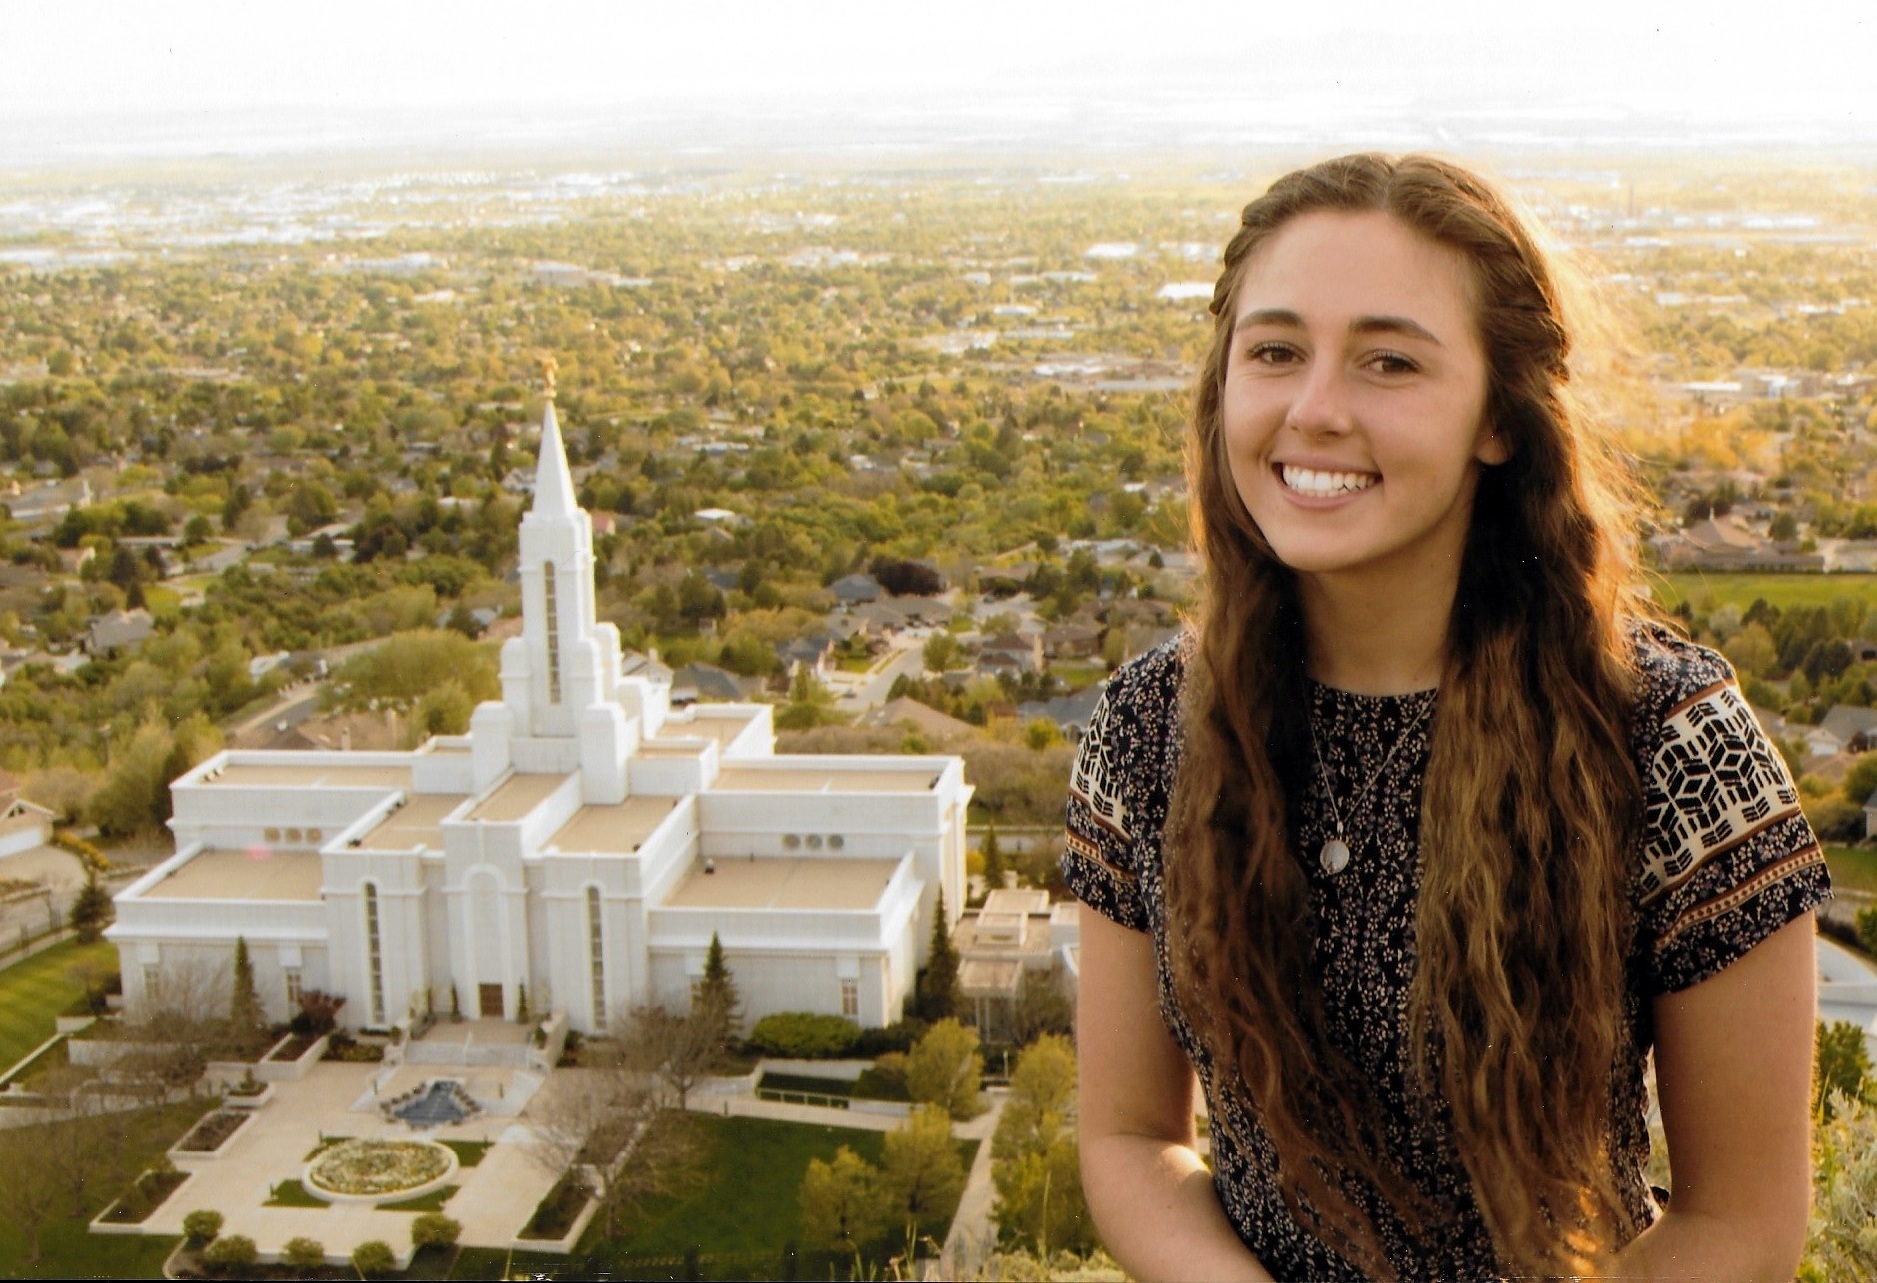 Lds Missionary From Utah Dies In Pennsylvania Collision The Daily